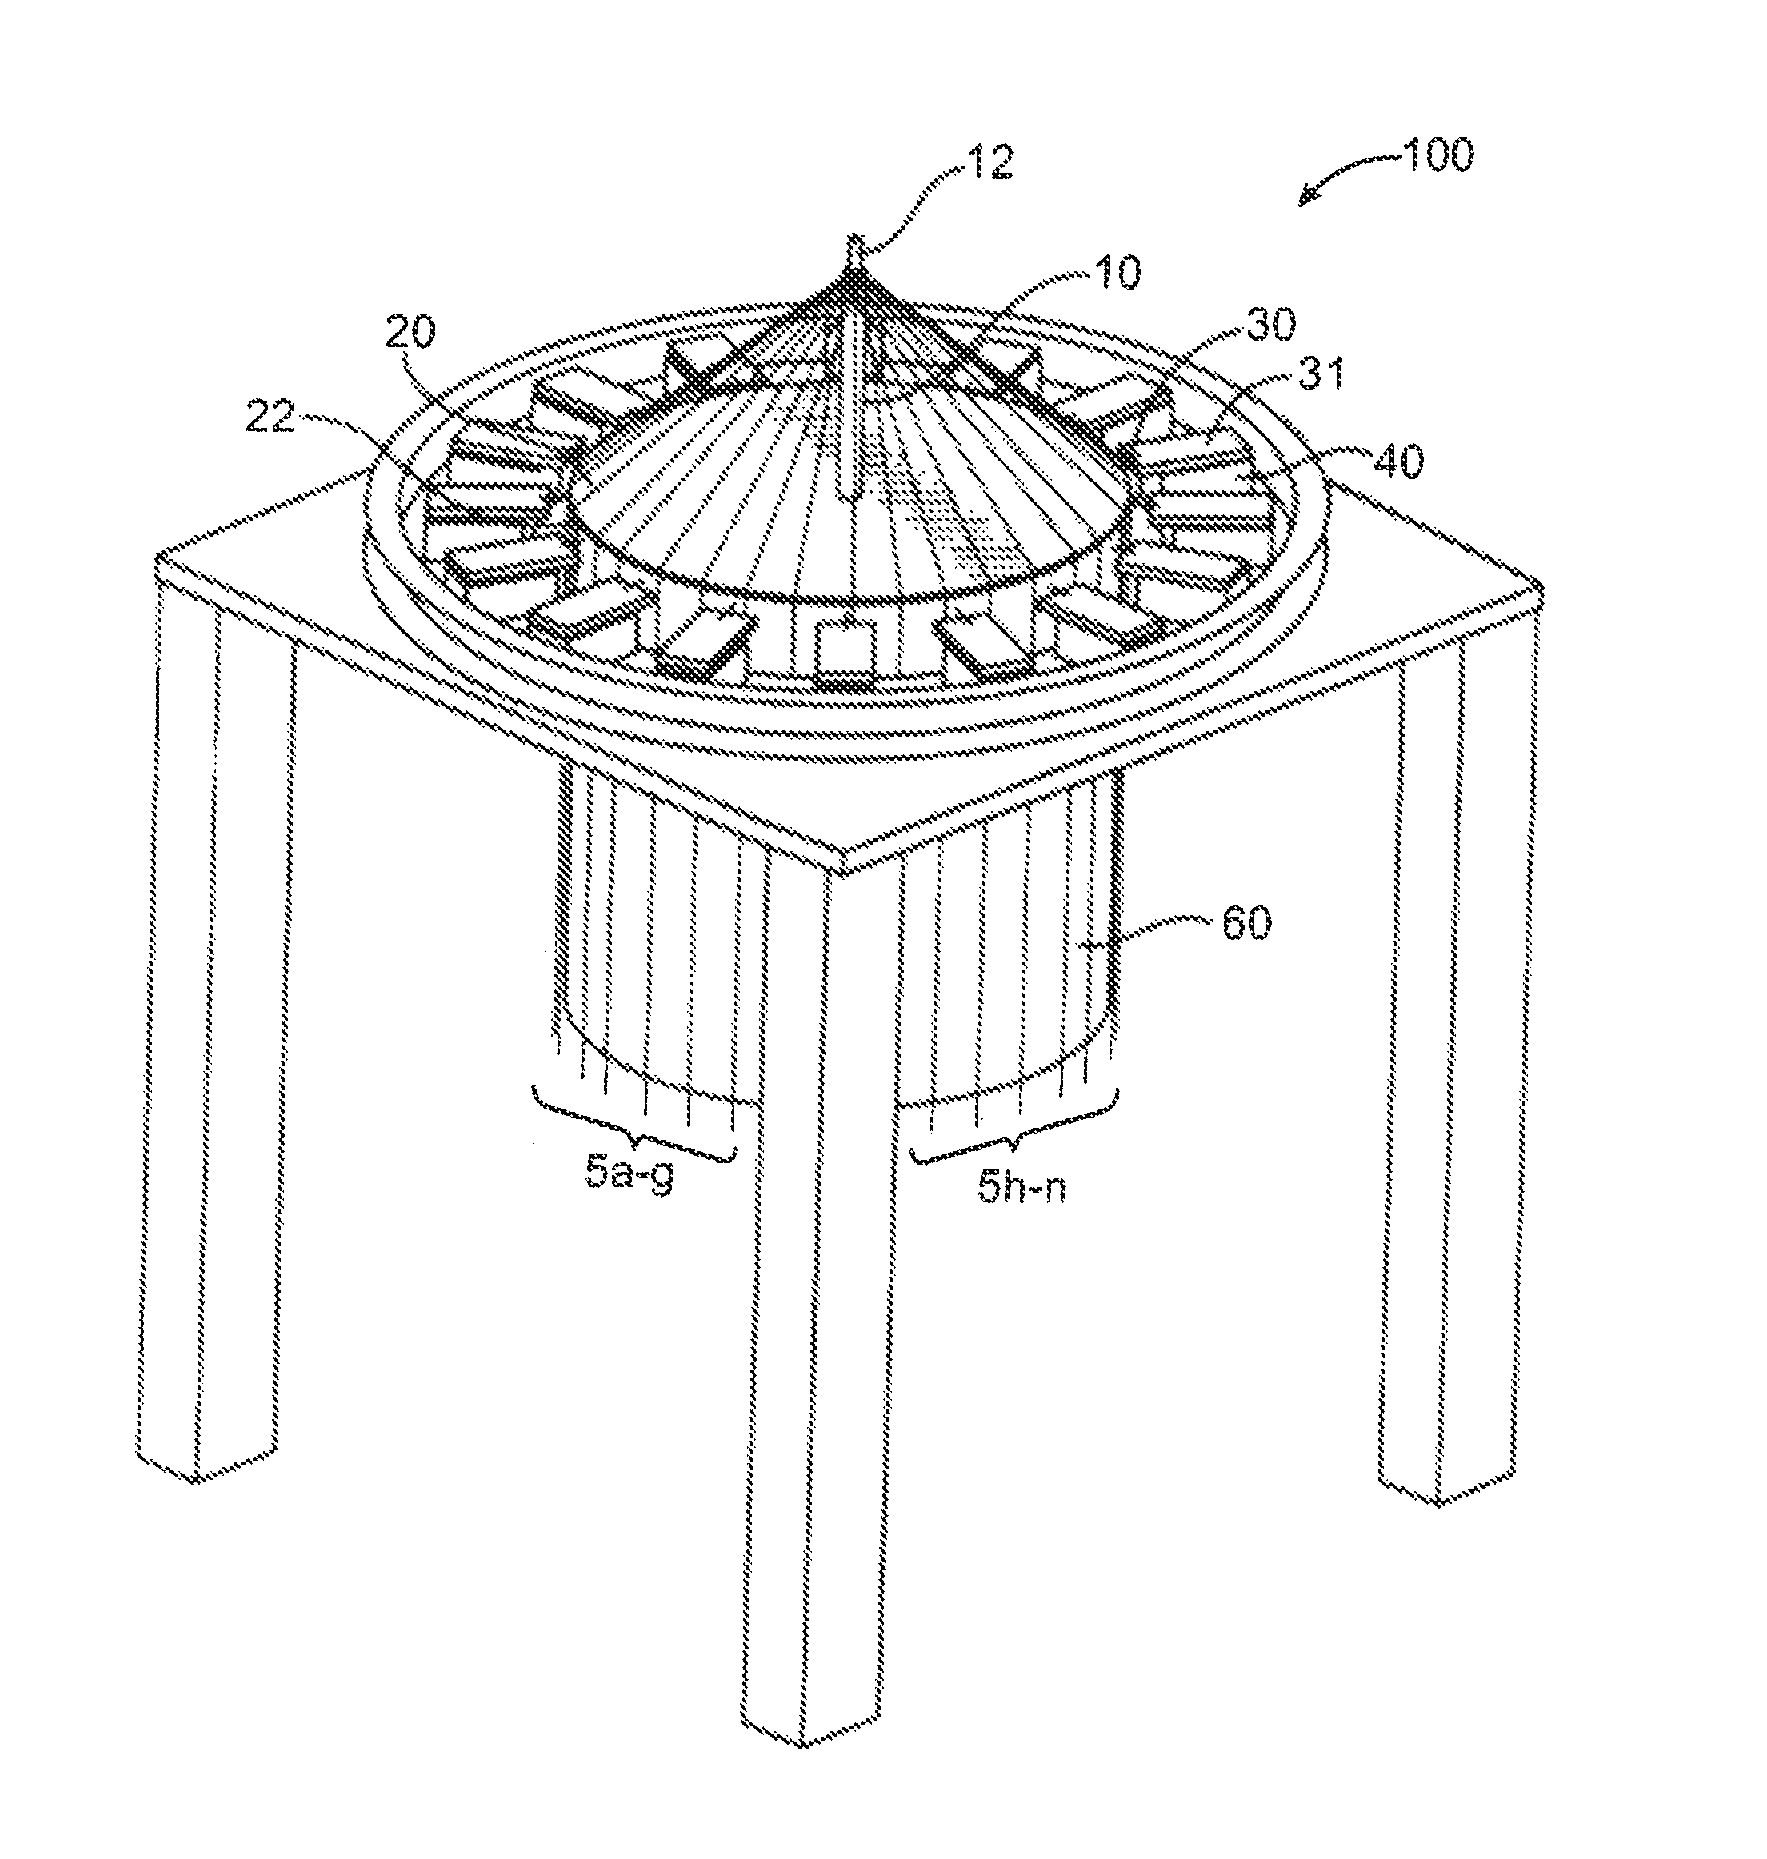 Braiding mechanism and methods of use